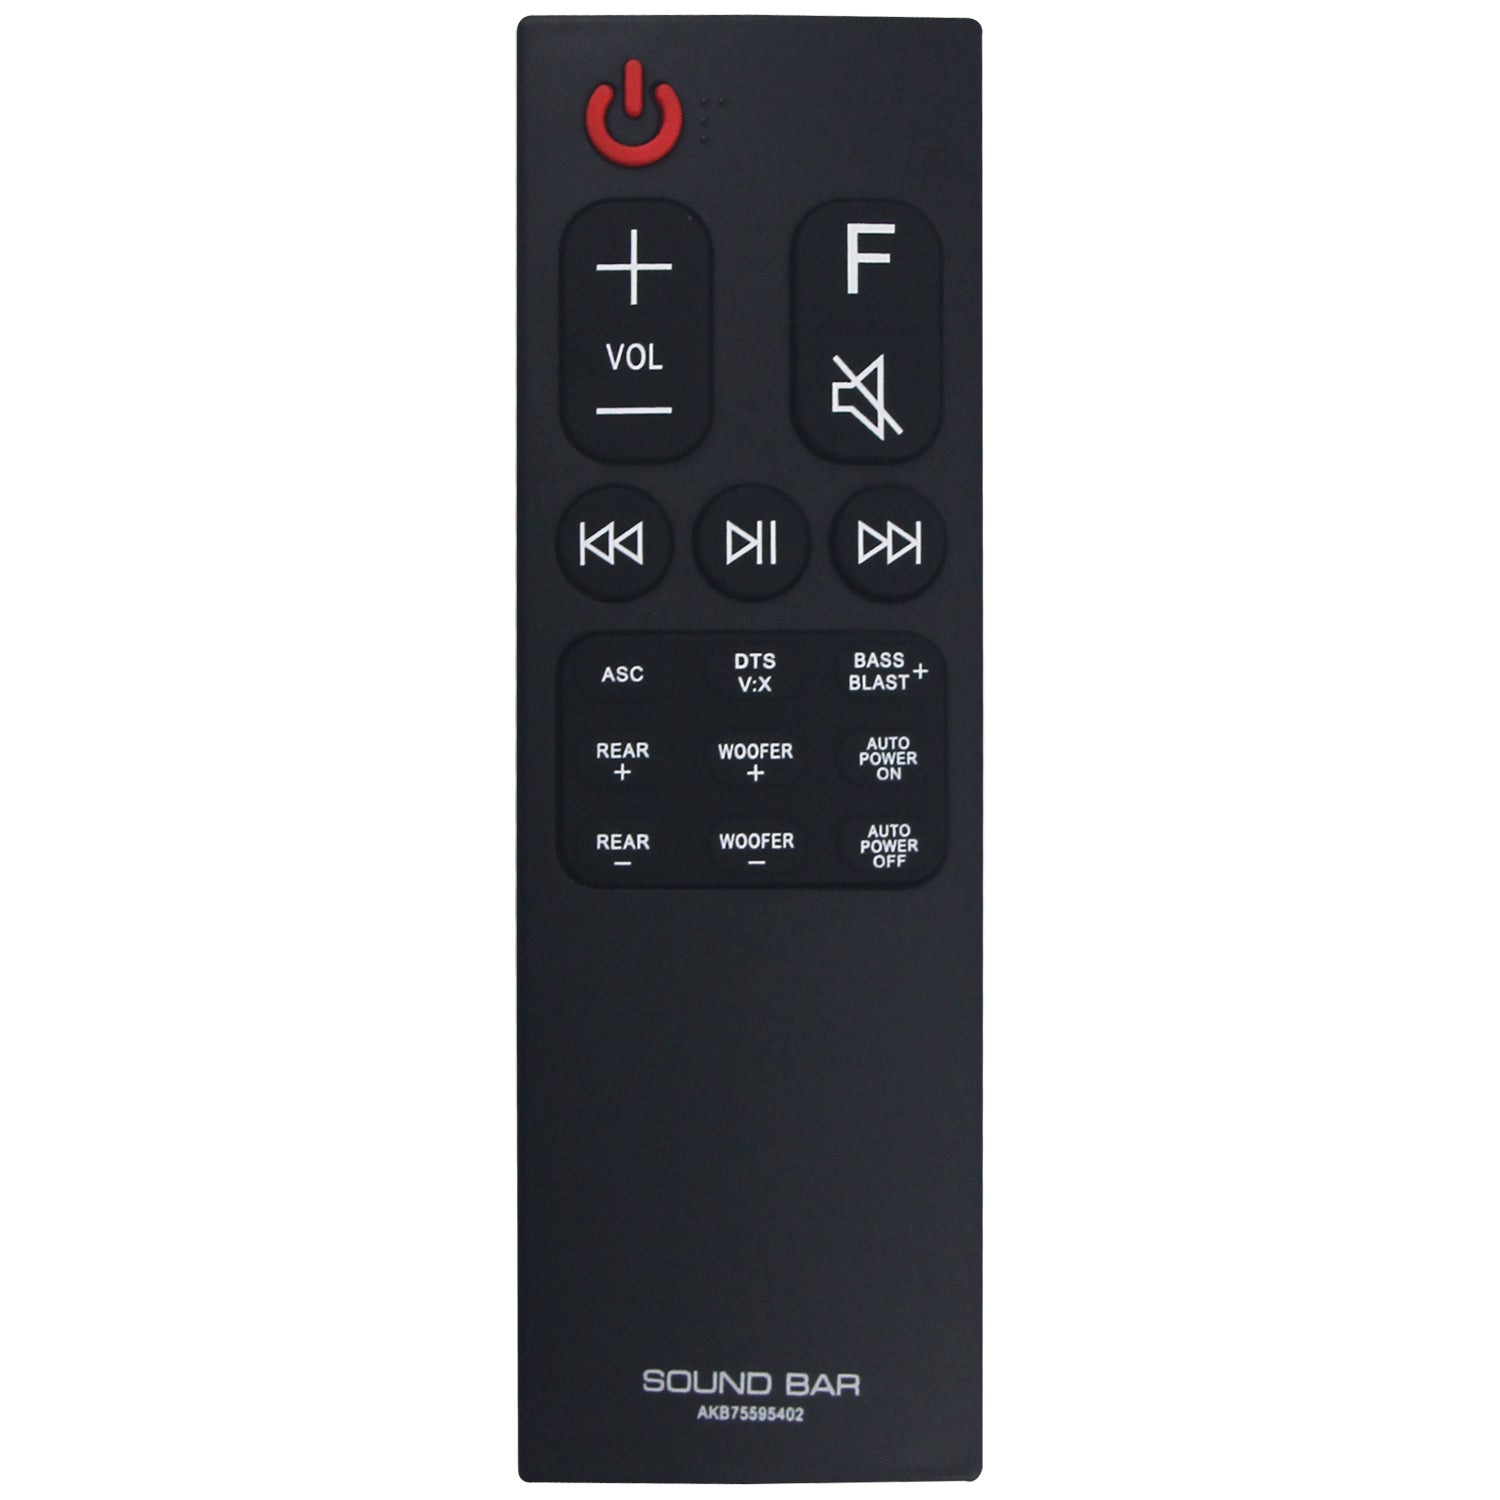 AKB75595402 Remote Control Replacement for for LG Soundbar